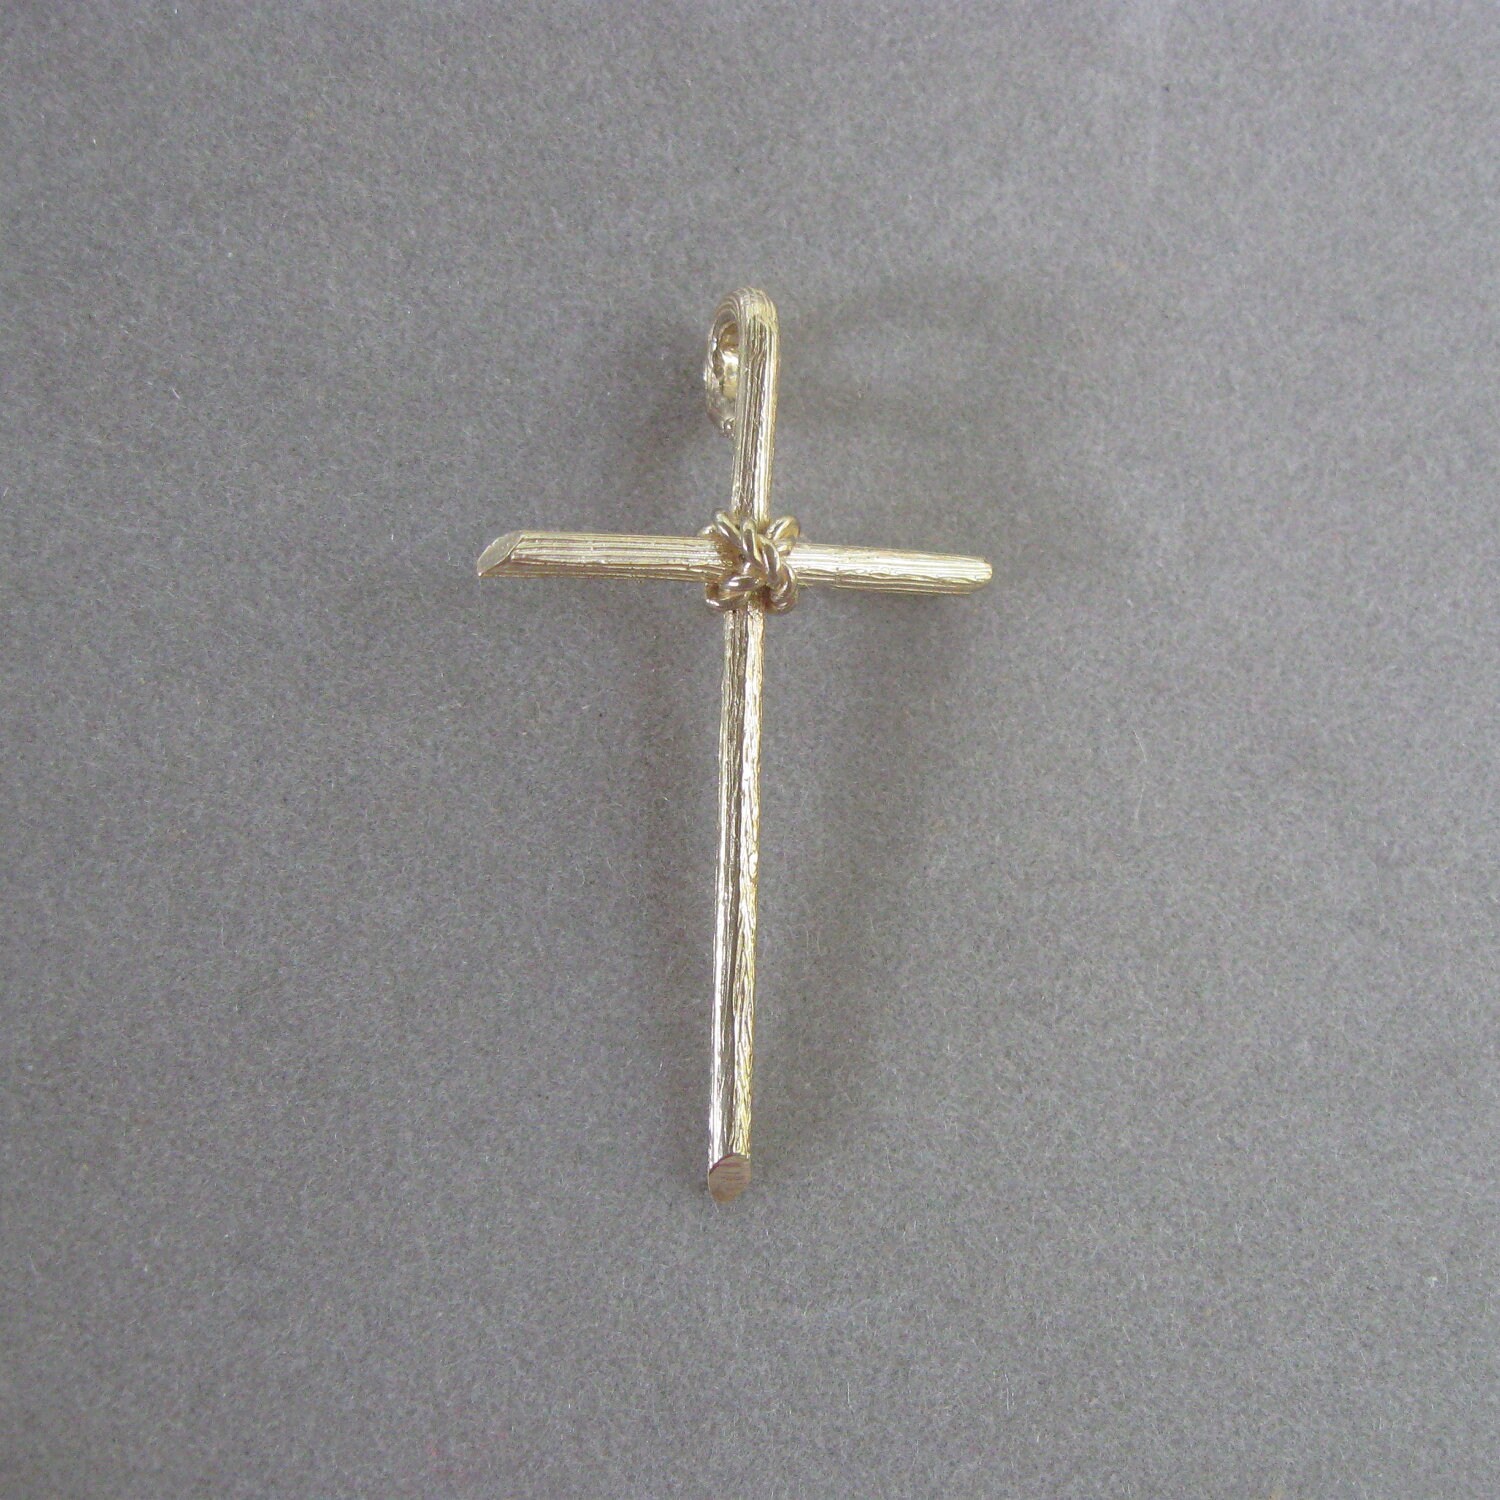 Solid 14k Gold Cross Wood Grain Texture with by DesignsbyDorris